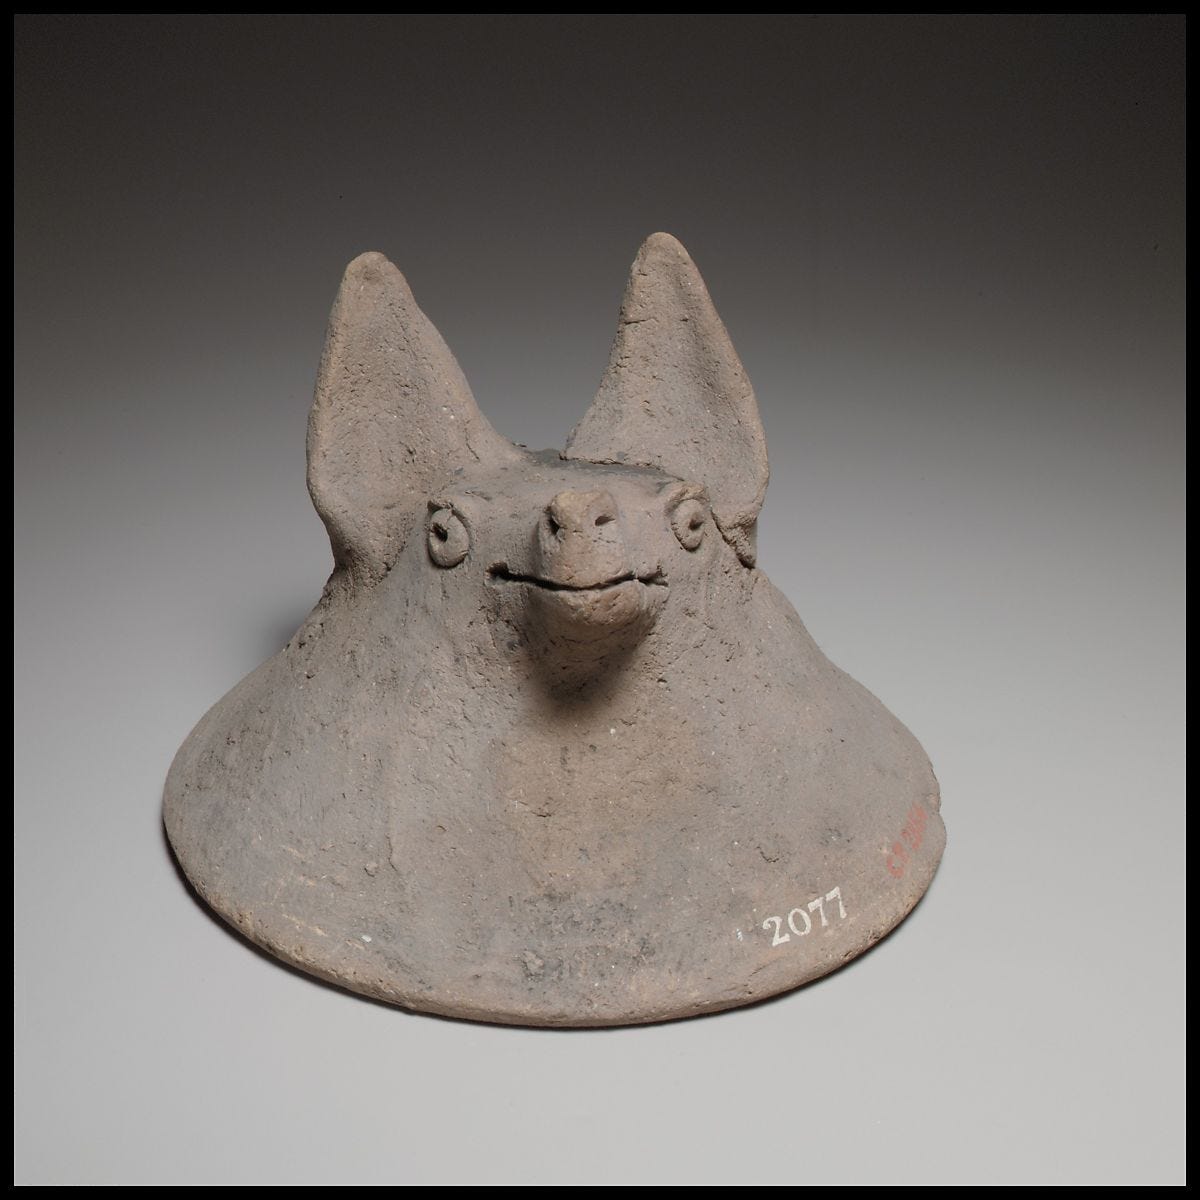 Terracotta mask in the shape of the head of a fox, dog, or bat, Terracotta, Cypriot 